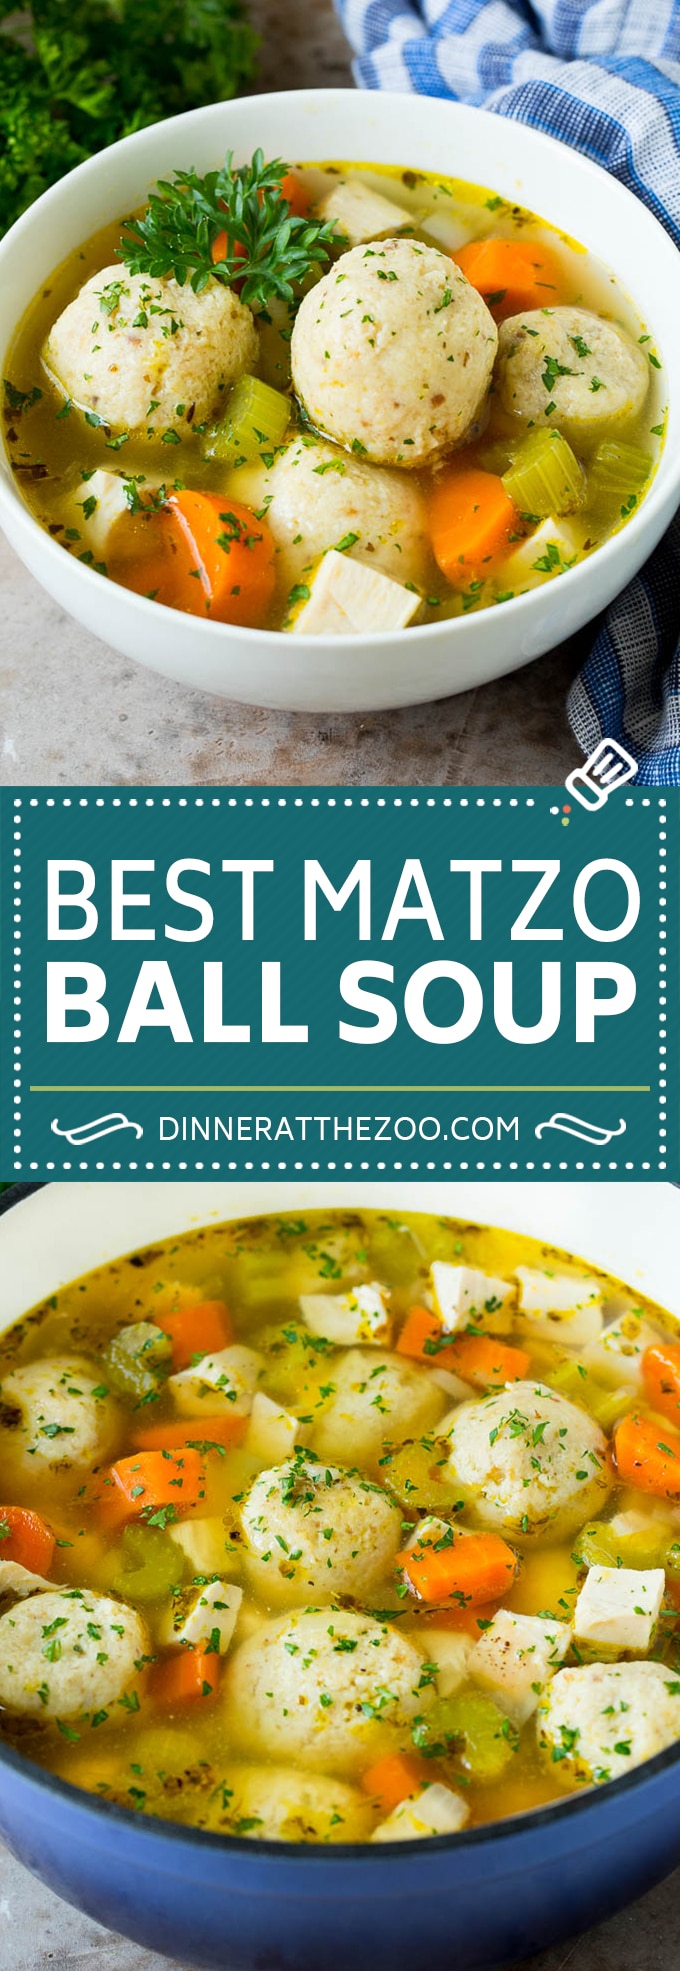 This matzo ball soup is chicken and vegetables simmered with matzo balls in a savory broth.